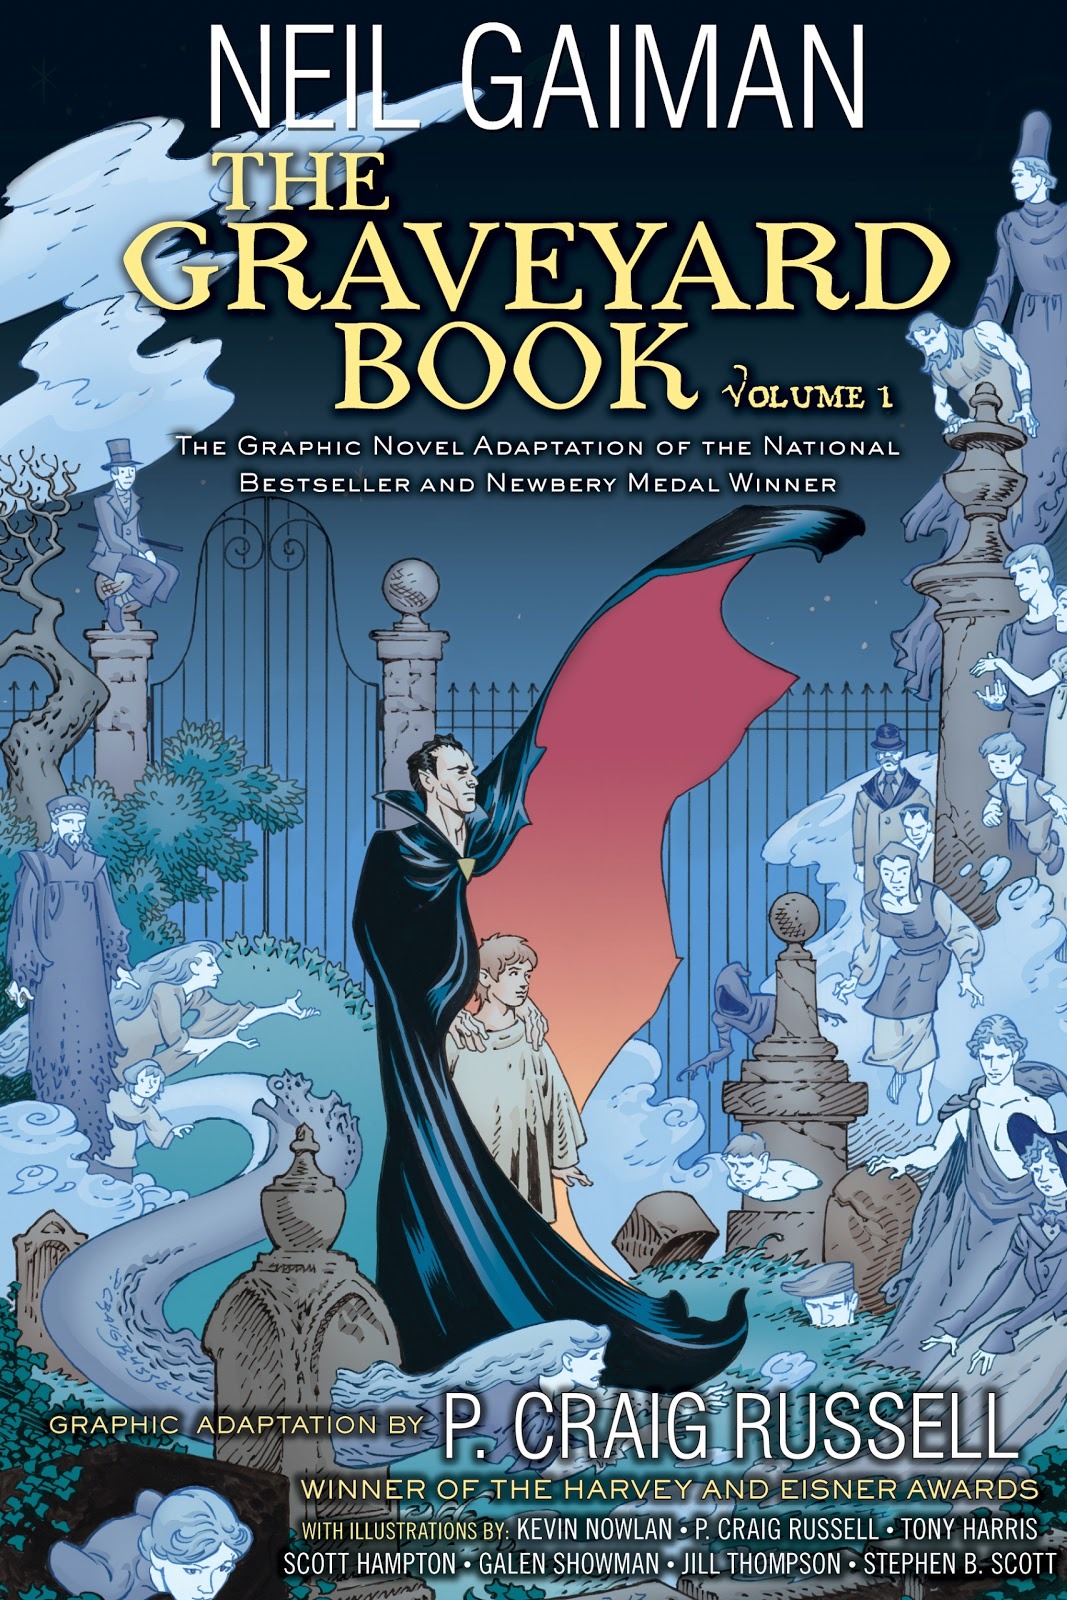 The Graveyard Book, Volume 1 by P. Craig Russell